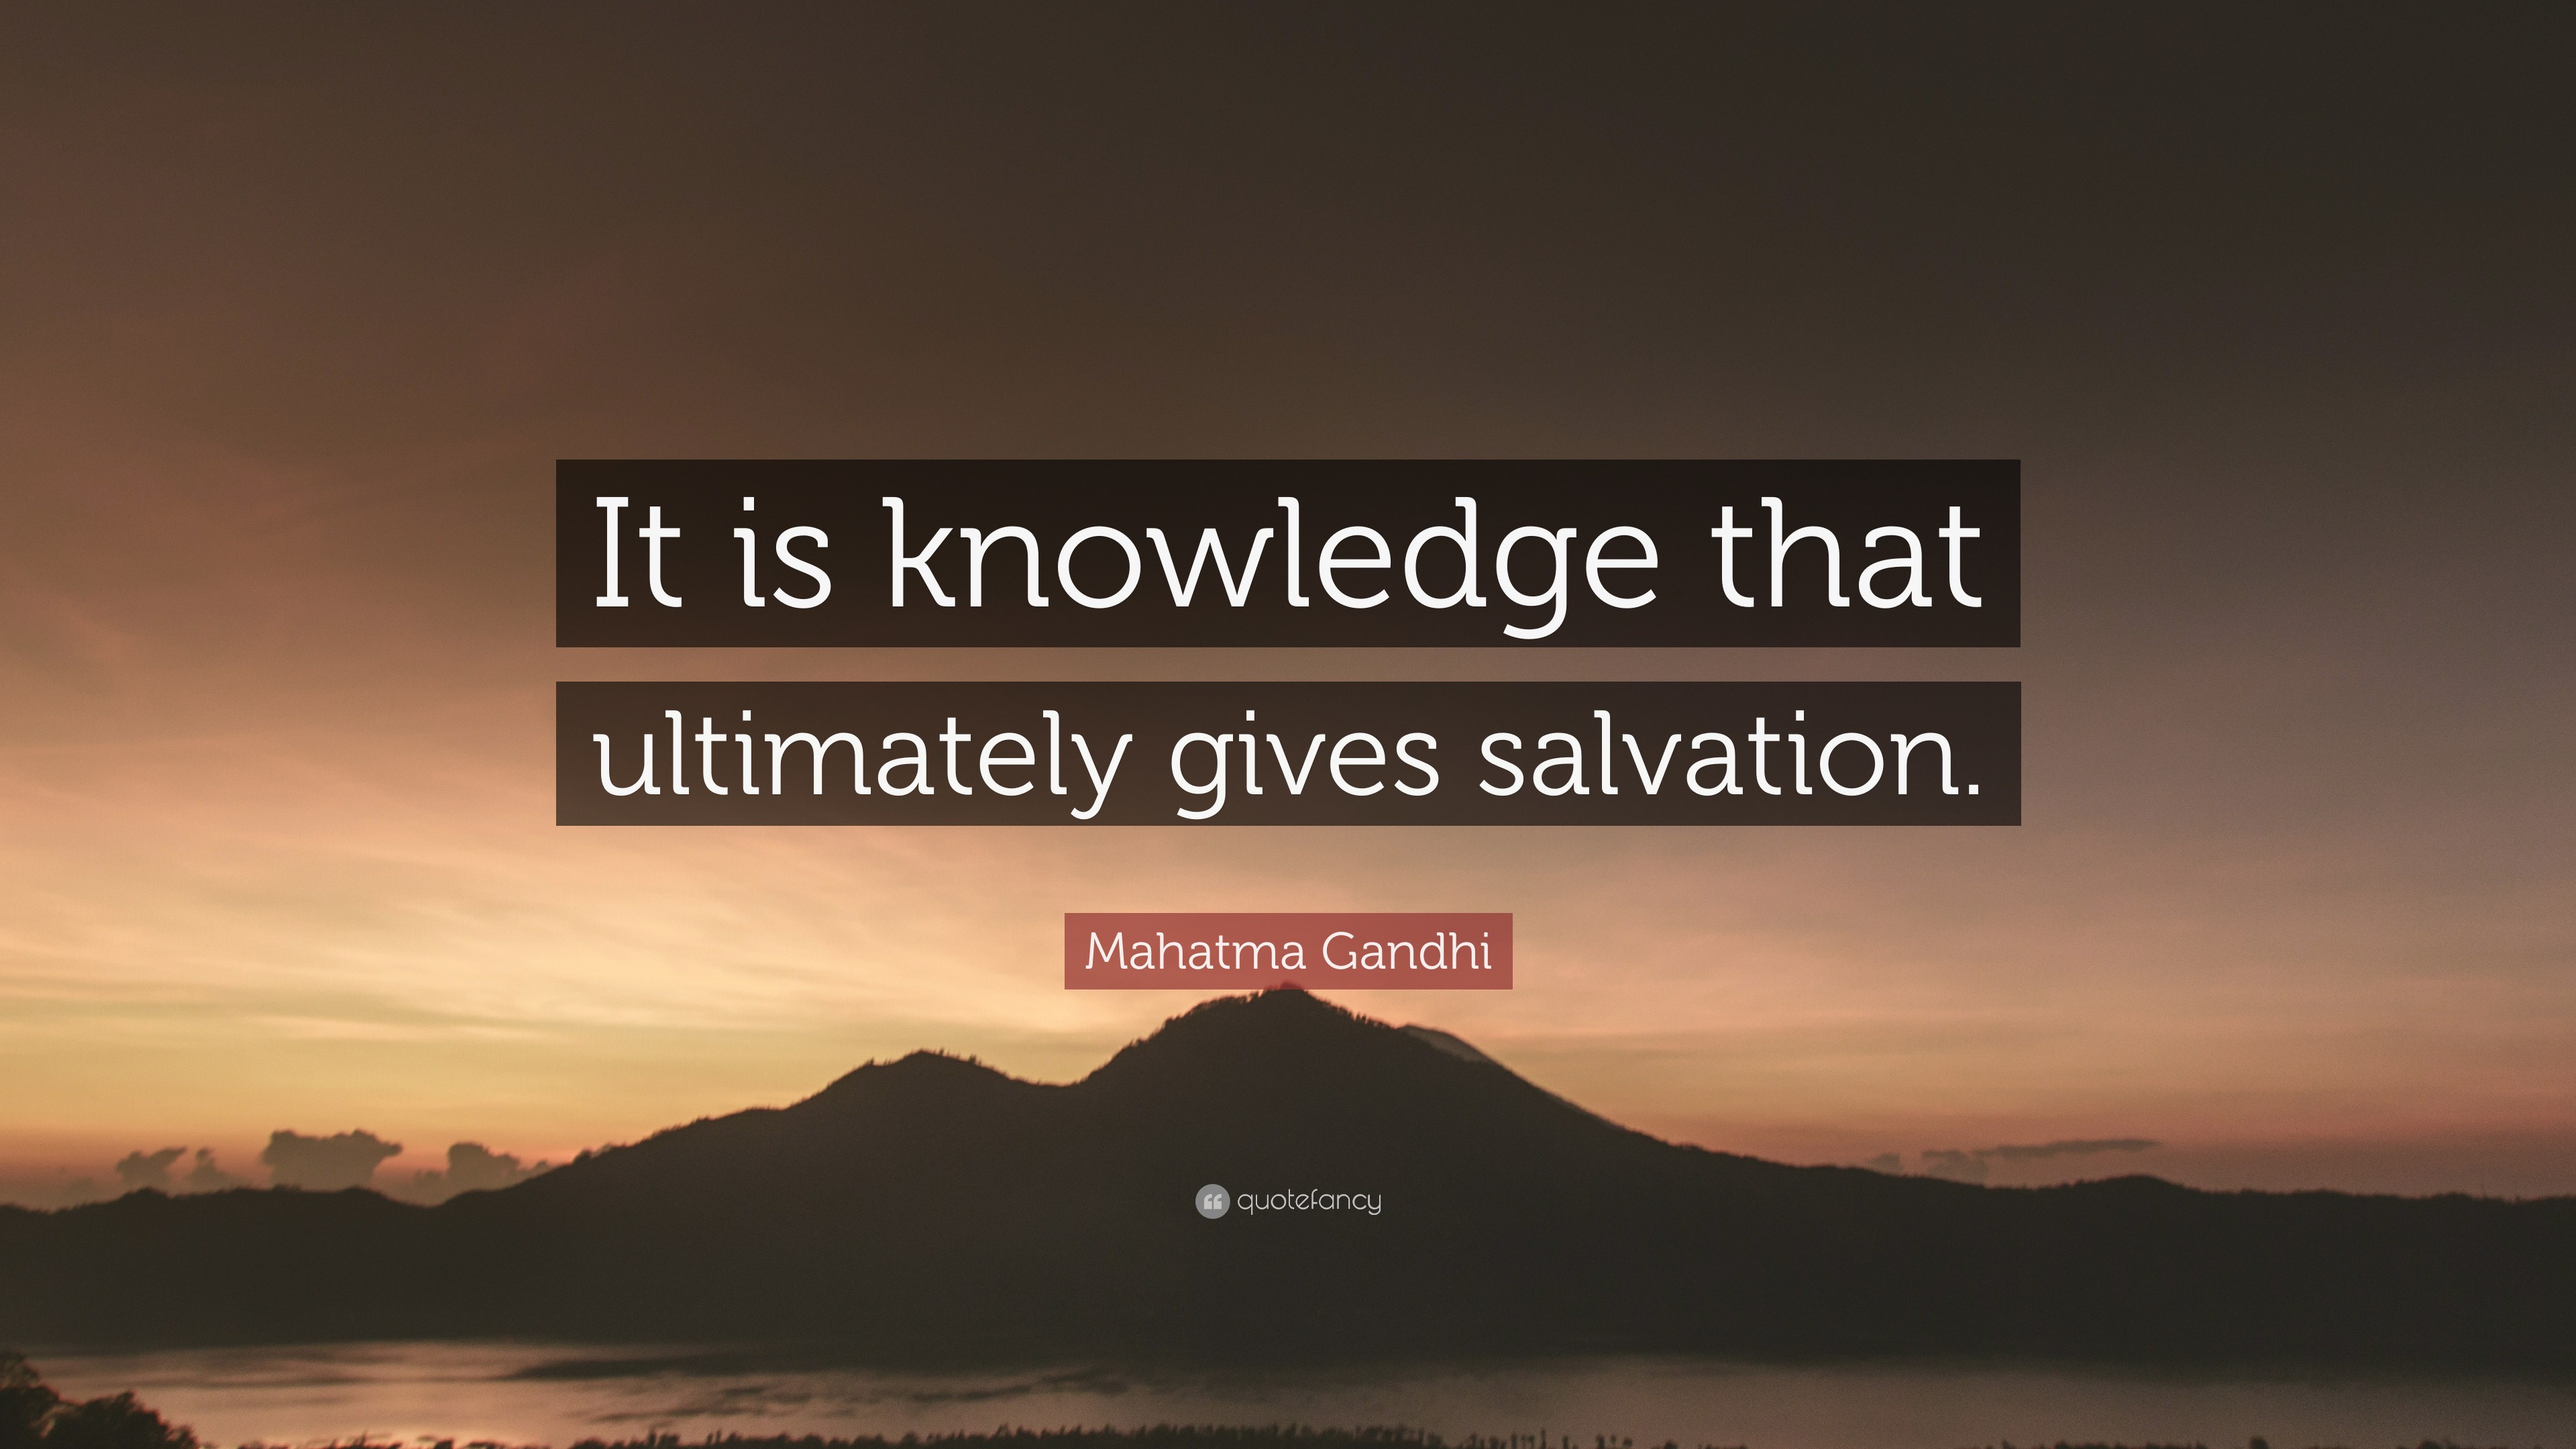 Mahatma Gandhi Quote: “It is knowledge that ultimately gives salvation.”